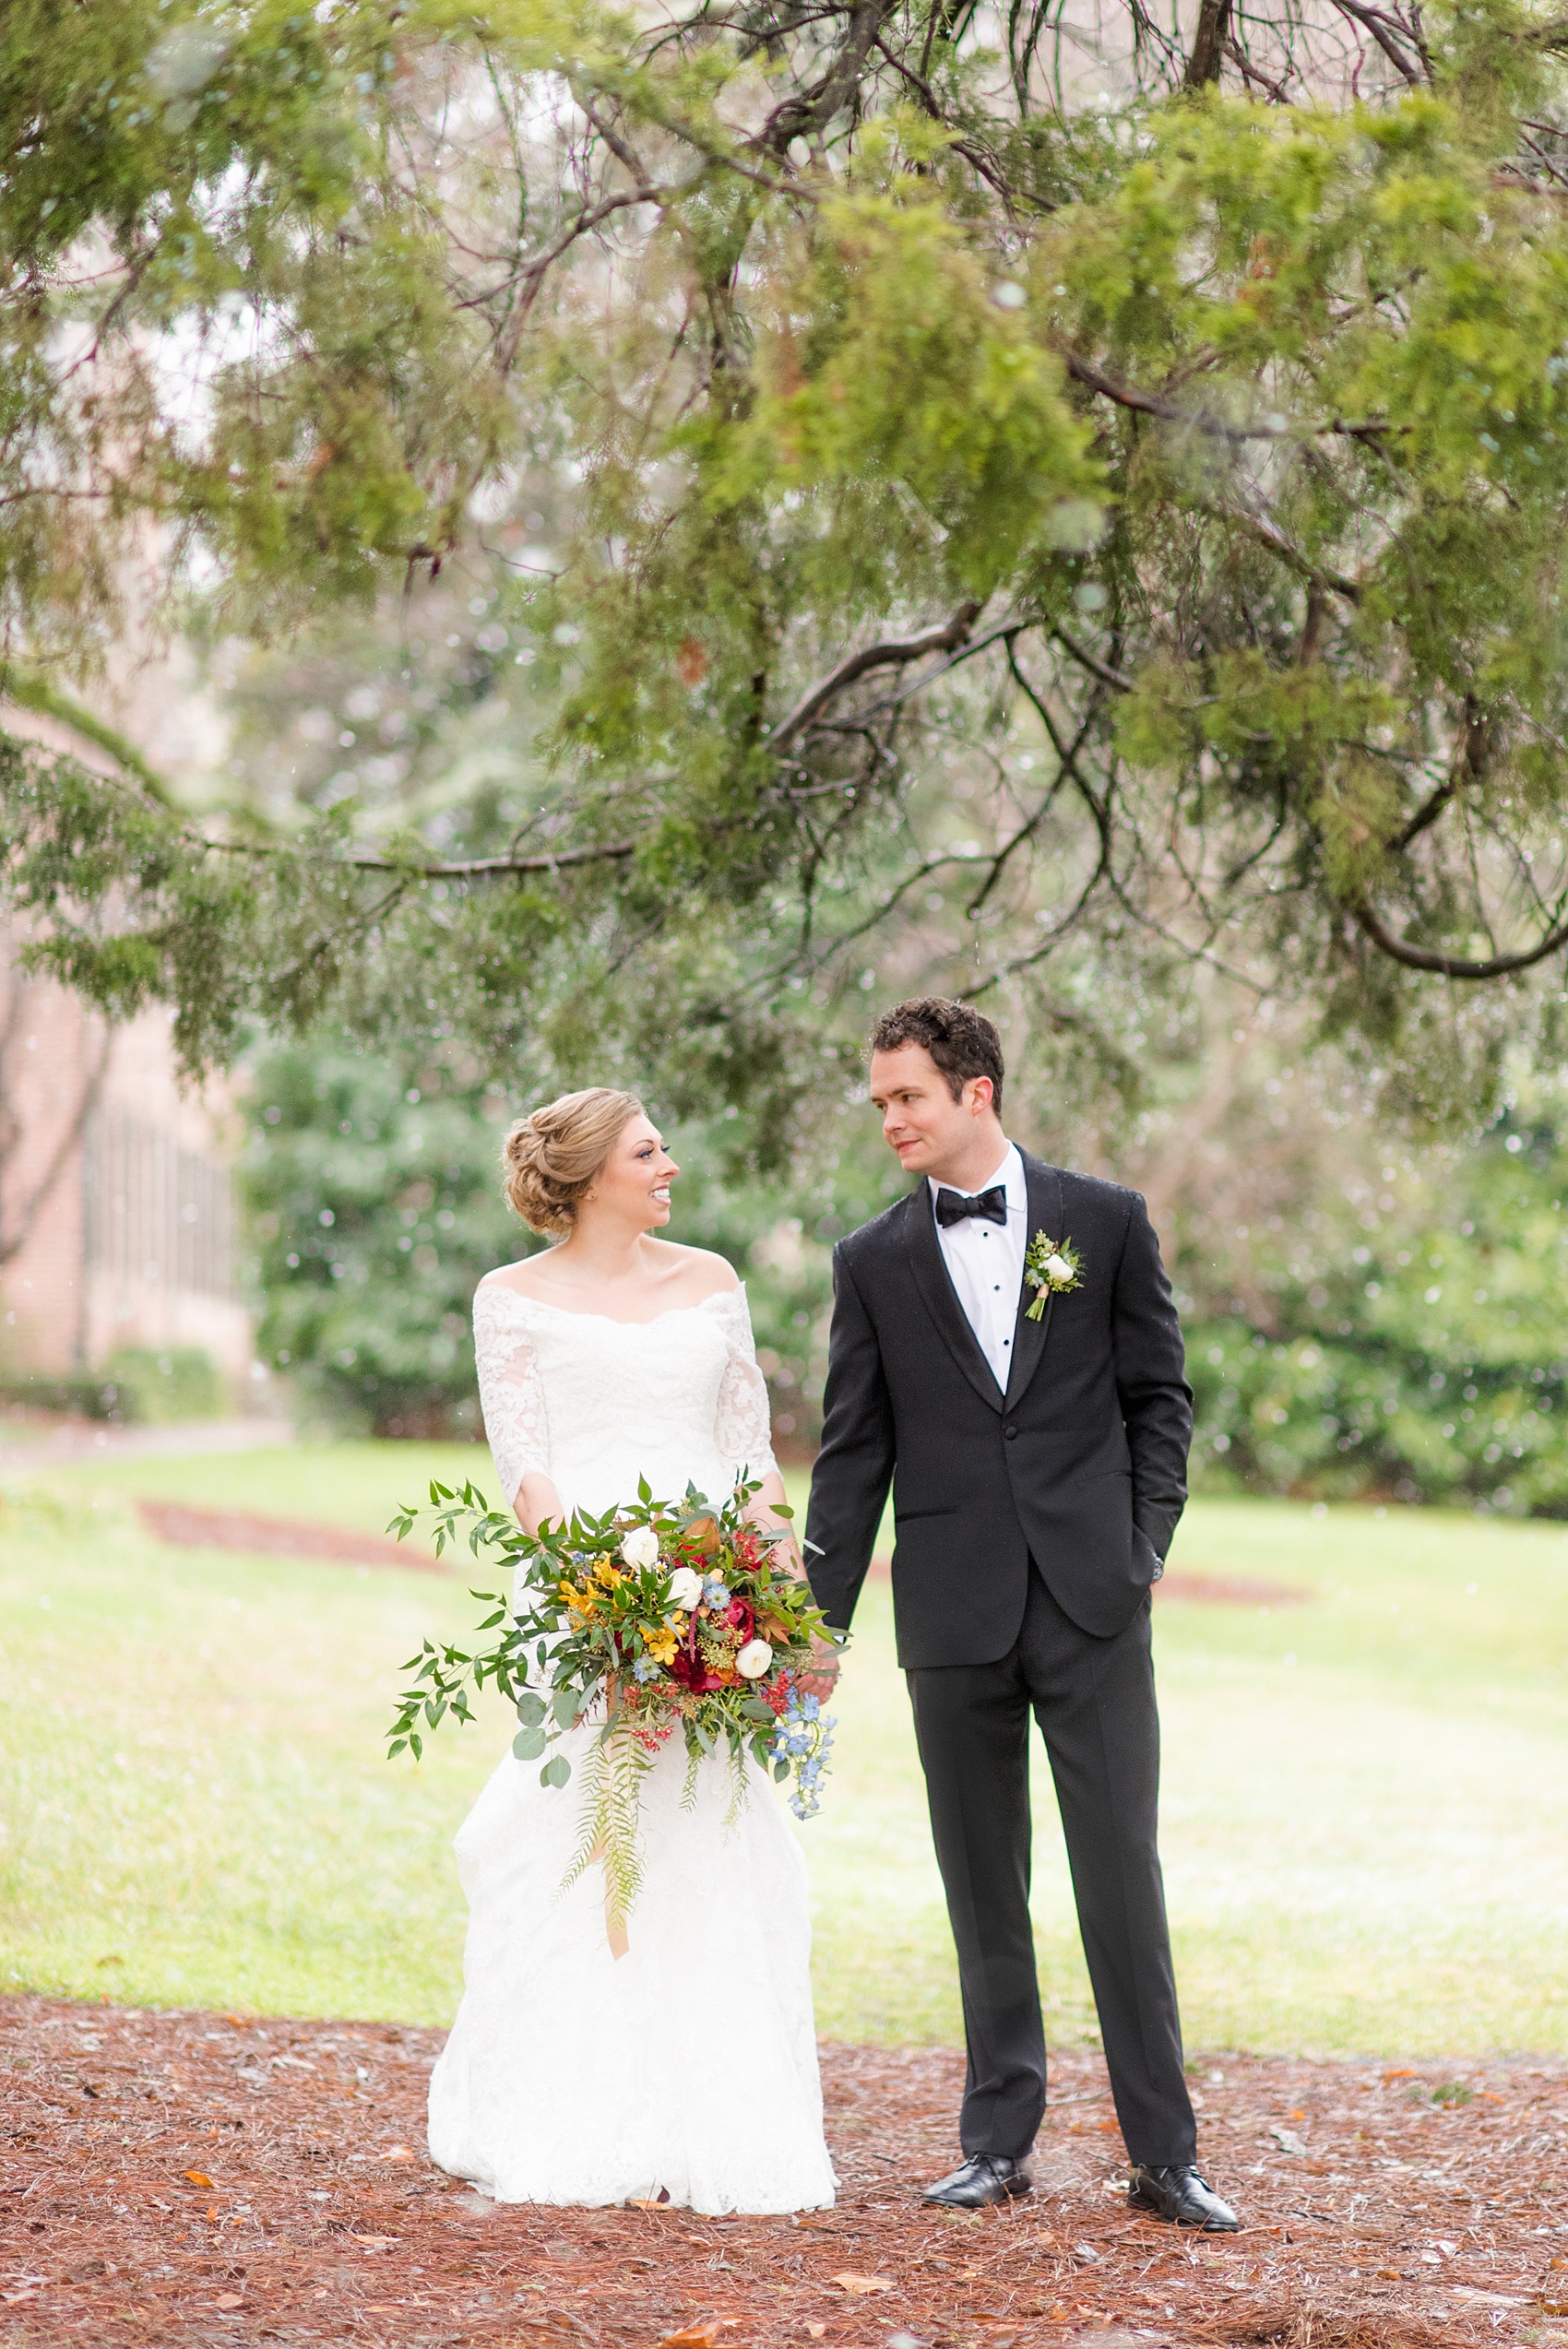 Beautiful wedding photos at The Carolina Inn at Chapel Hill, North Carolina by Mikkel Paige Photography. Photo of the bride and groom's winter wedding, enjoying the moments by an evergreen tree at this southern venue. Click through to see the rest of this gorgeous winter wedding! #thecarolinainn #snowywedding